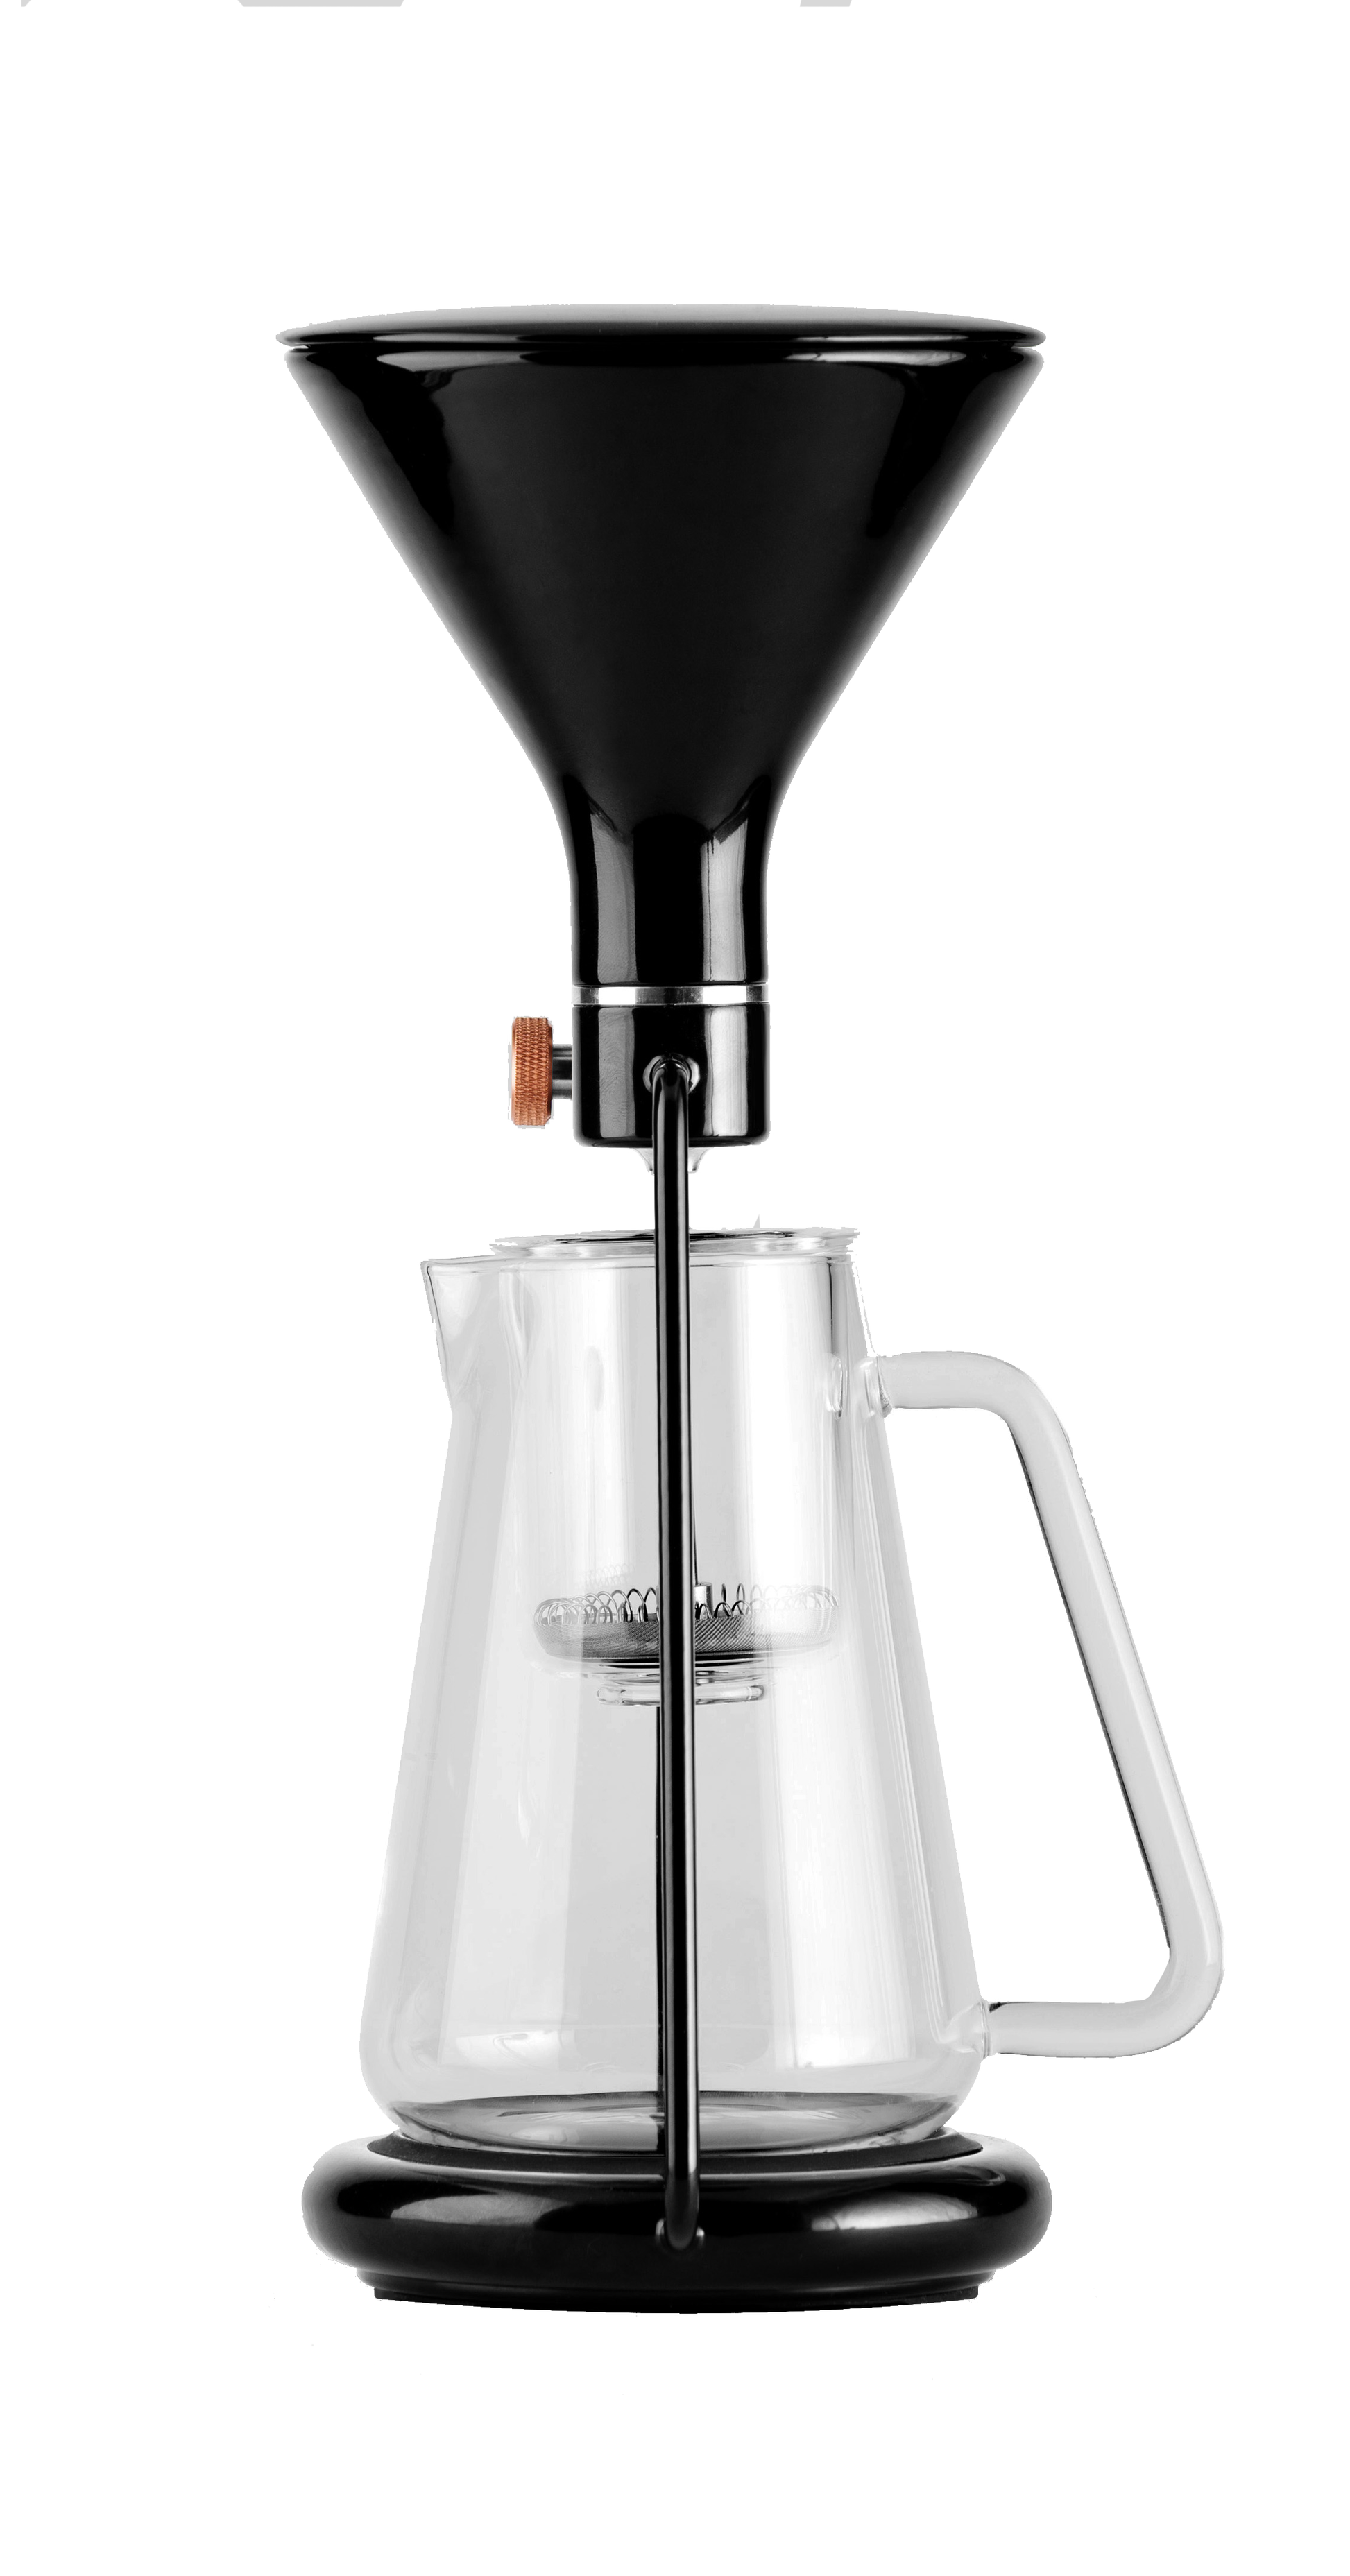 Goat Story GINA Smart Coffee Maker in Black – Whole Latte Love